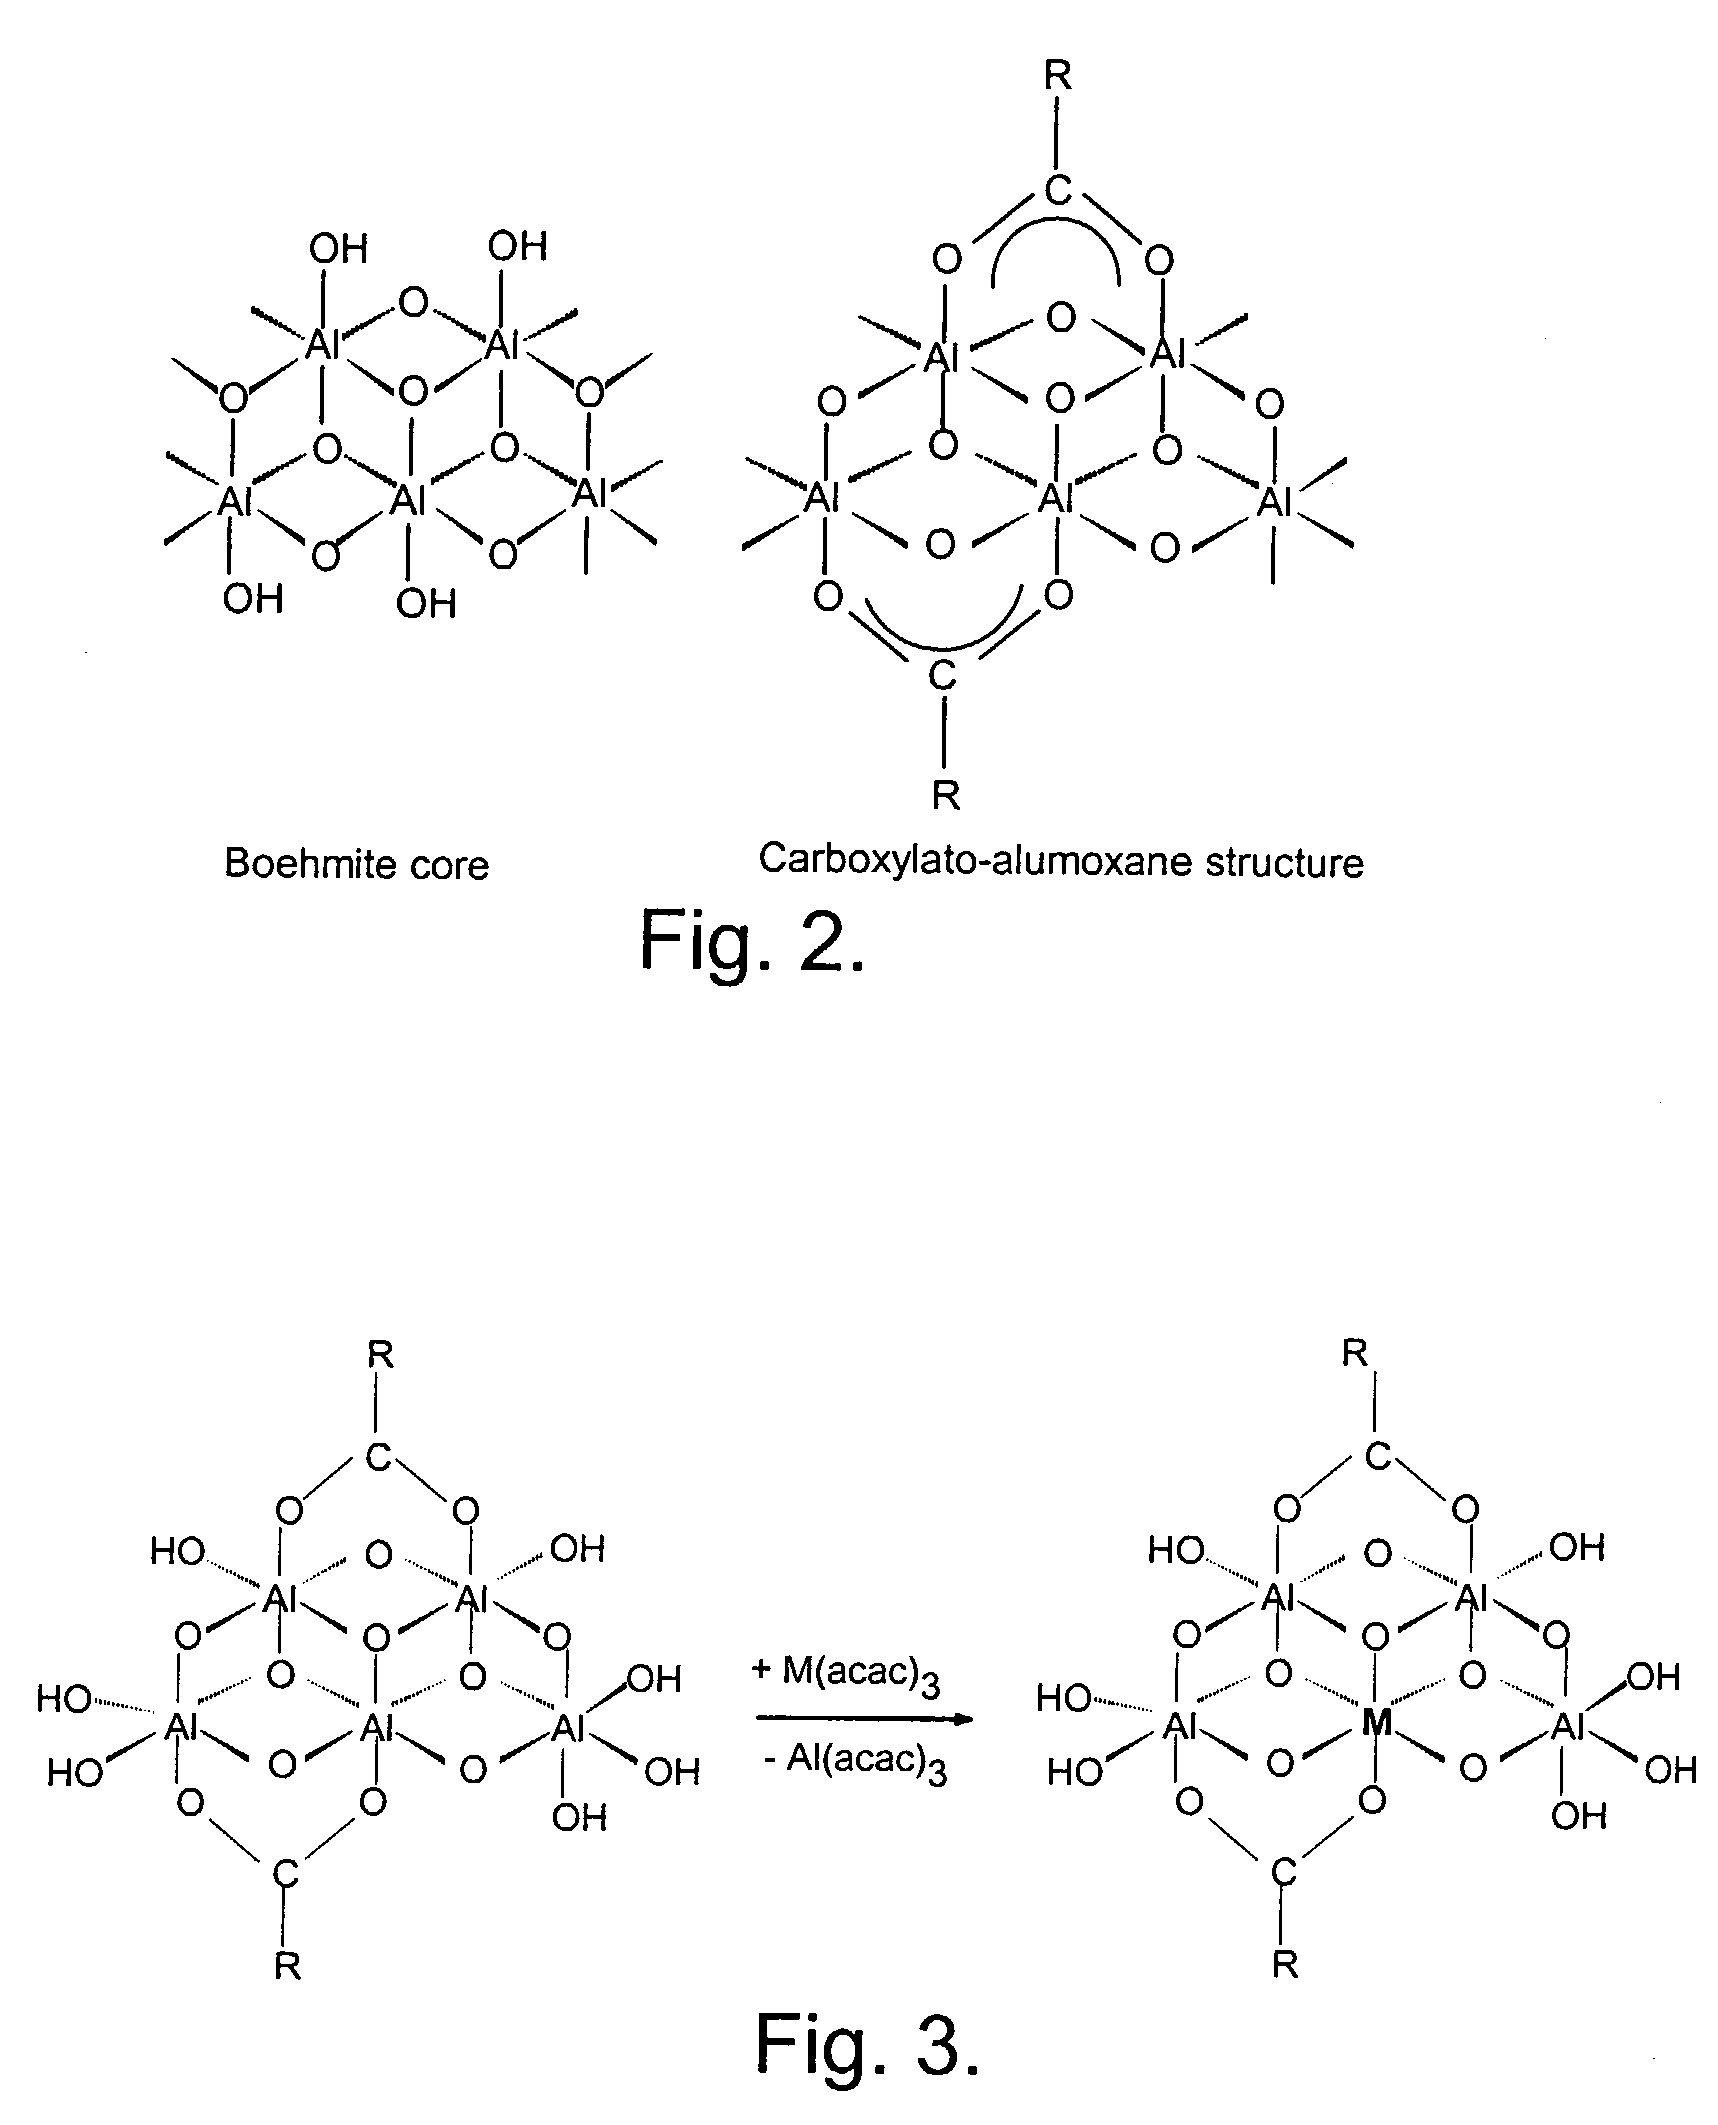 Oxidation catalysts comprising metal exchanged hexaaluminate wherein the metal is Sr, Pd, La, and/or Mn